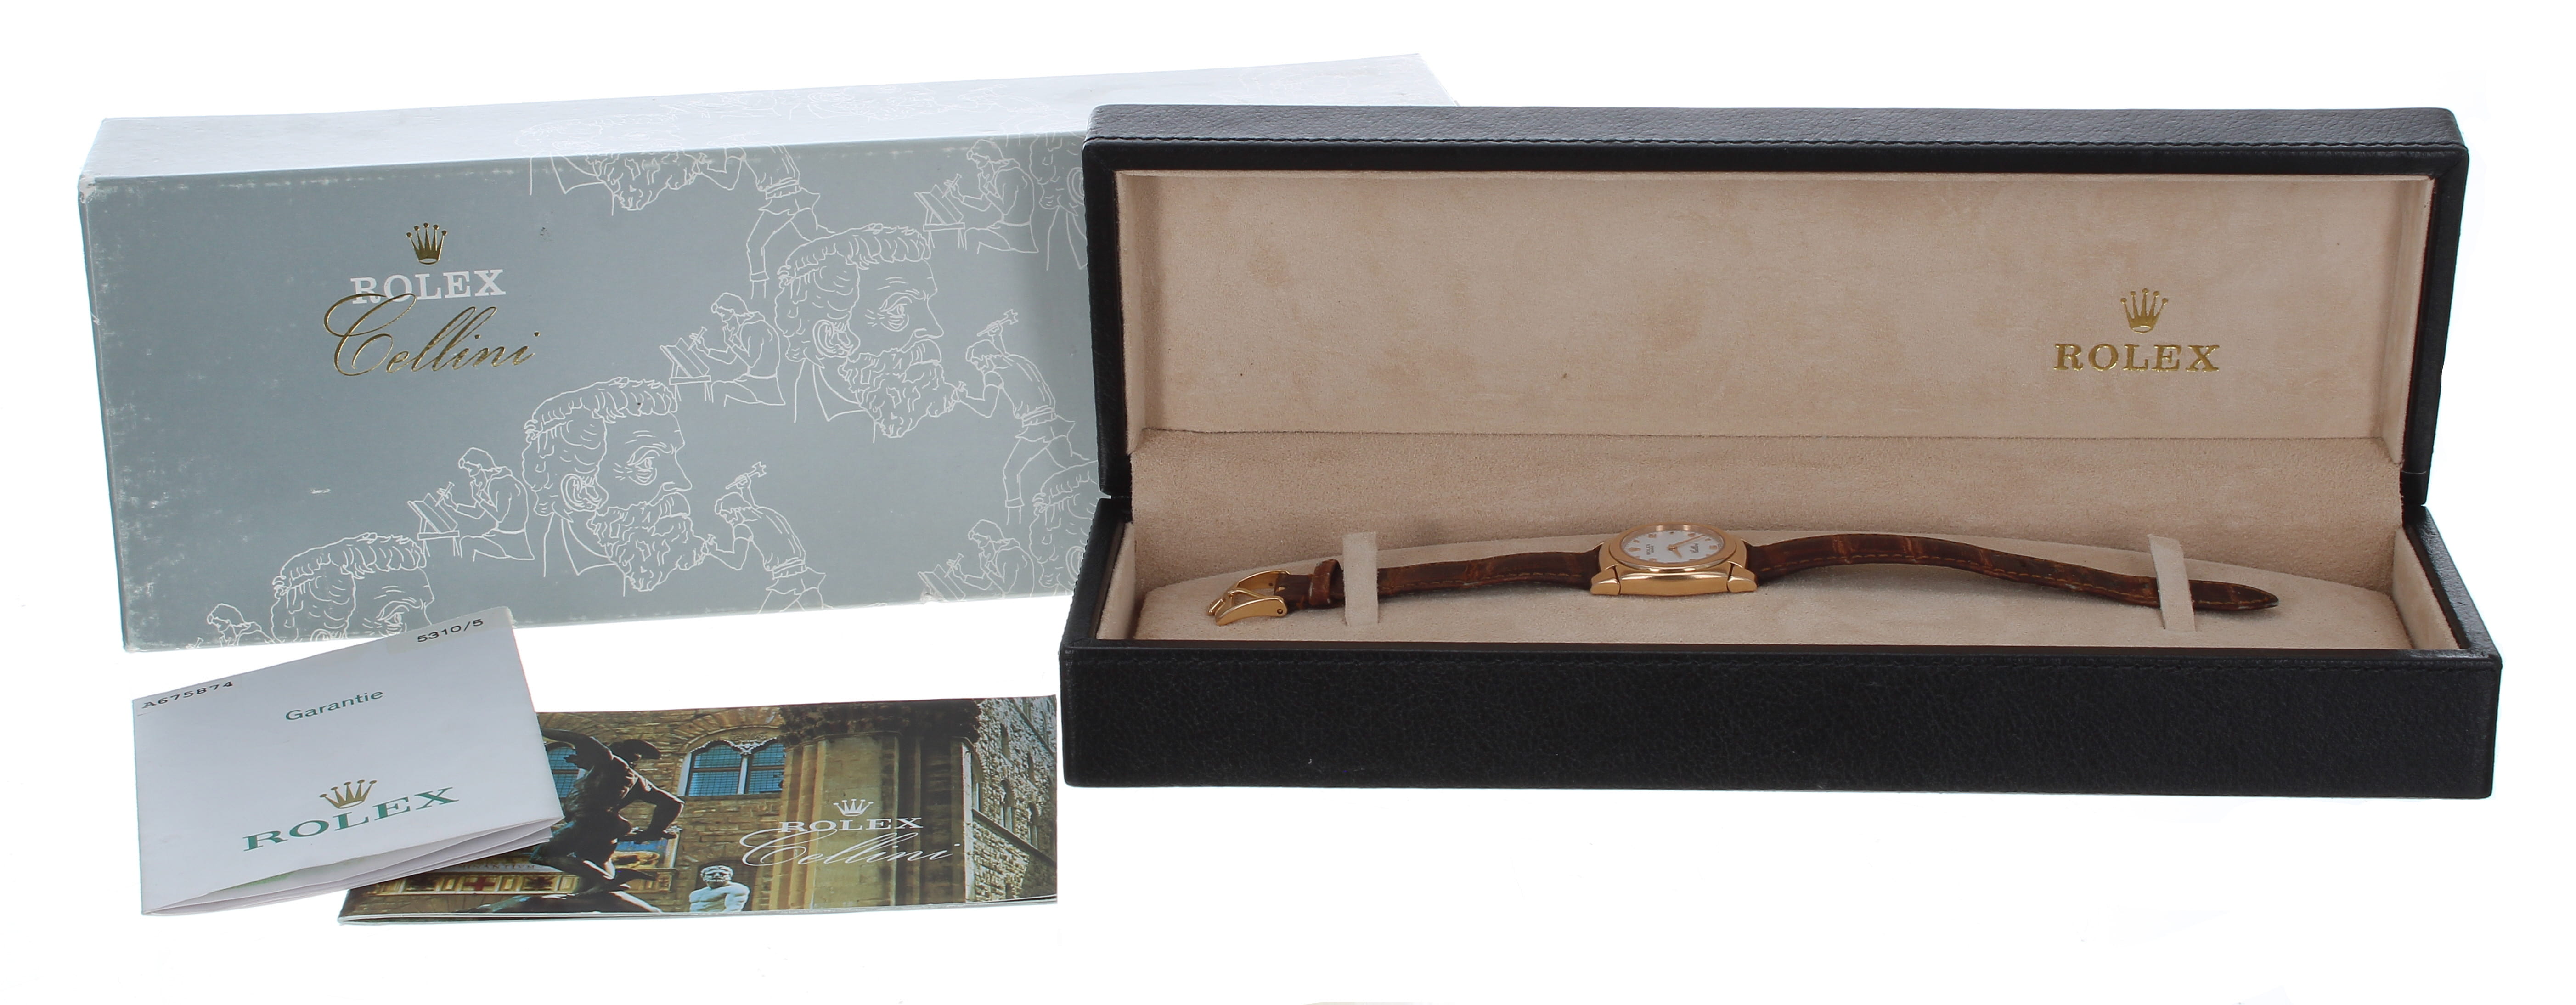 Rolex Cellini Cestello 18ct lady's wristwatch, reference no. 5310, serial no. A675xxx, circa 1999, - Image 3 of 4